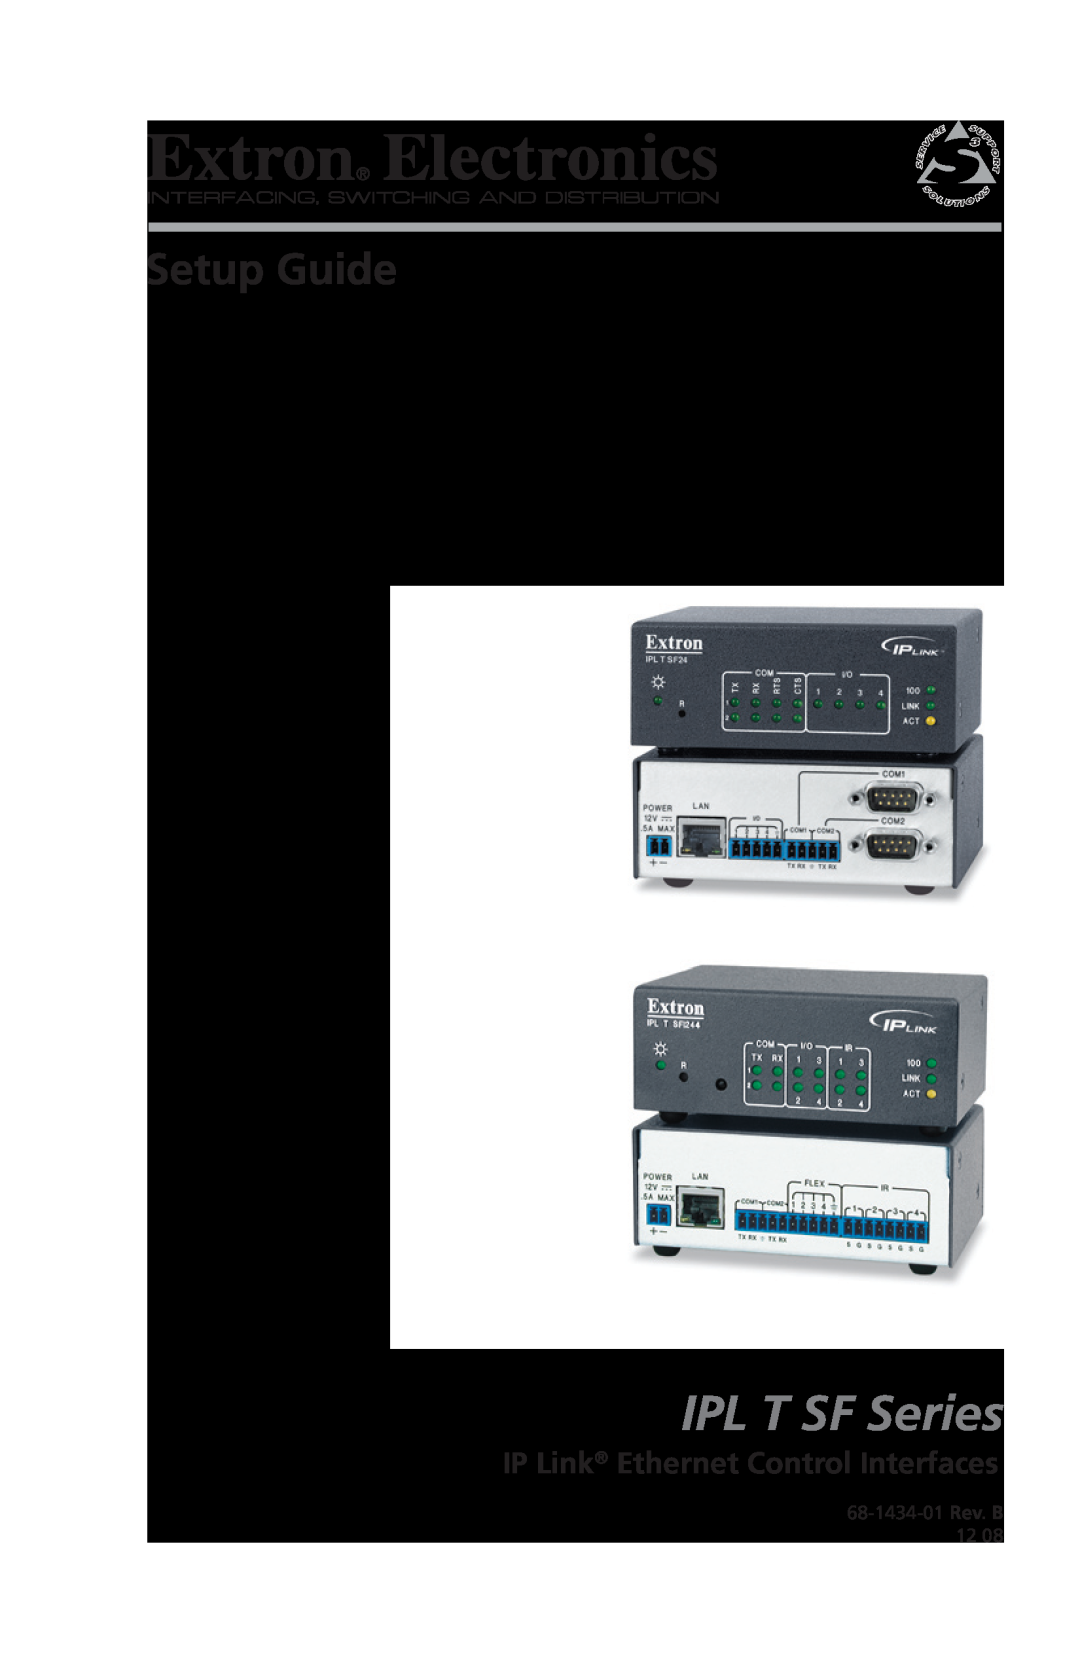 Extron electronic IPL T SF Series setup guide IP Link Ethernet Control Interfaces, Setup Guide, 68-1434-01 Rev. B 